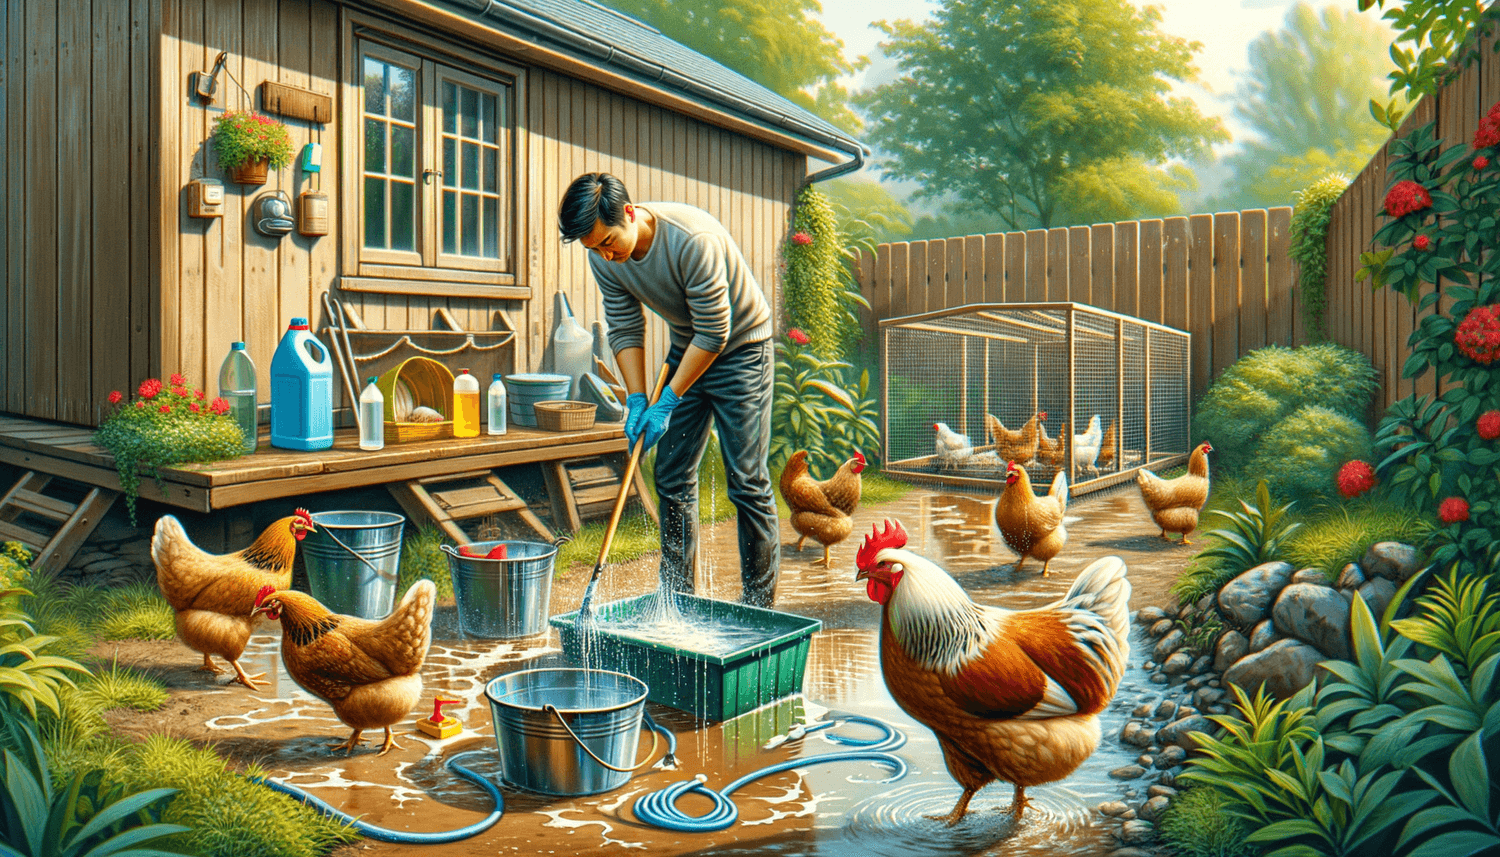 How To Clean Chickens?